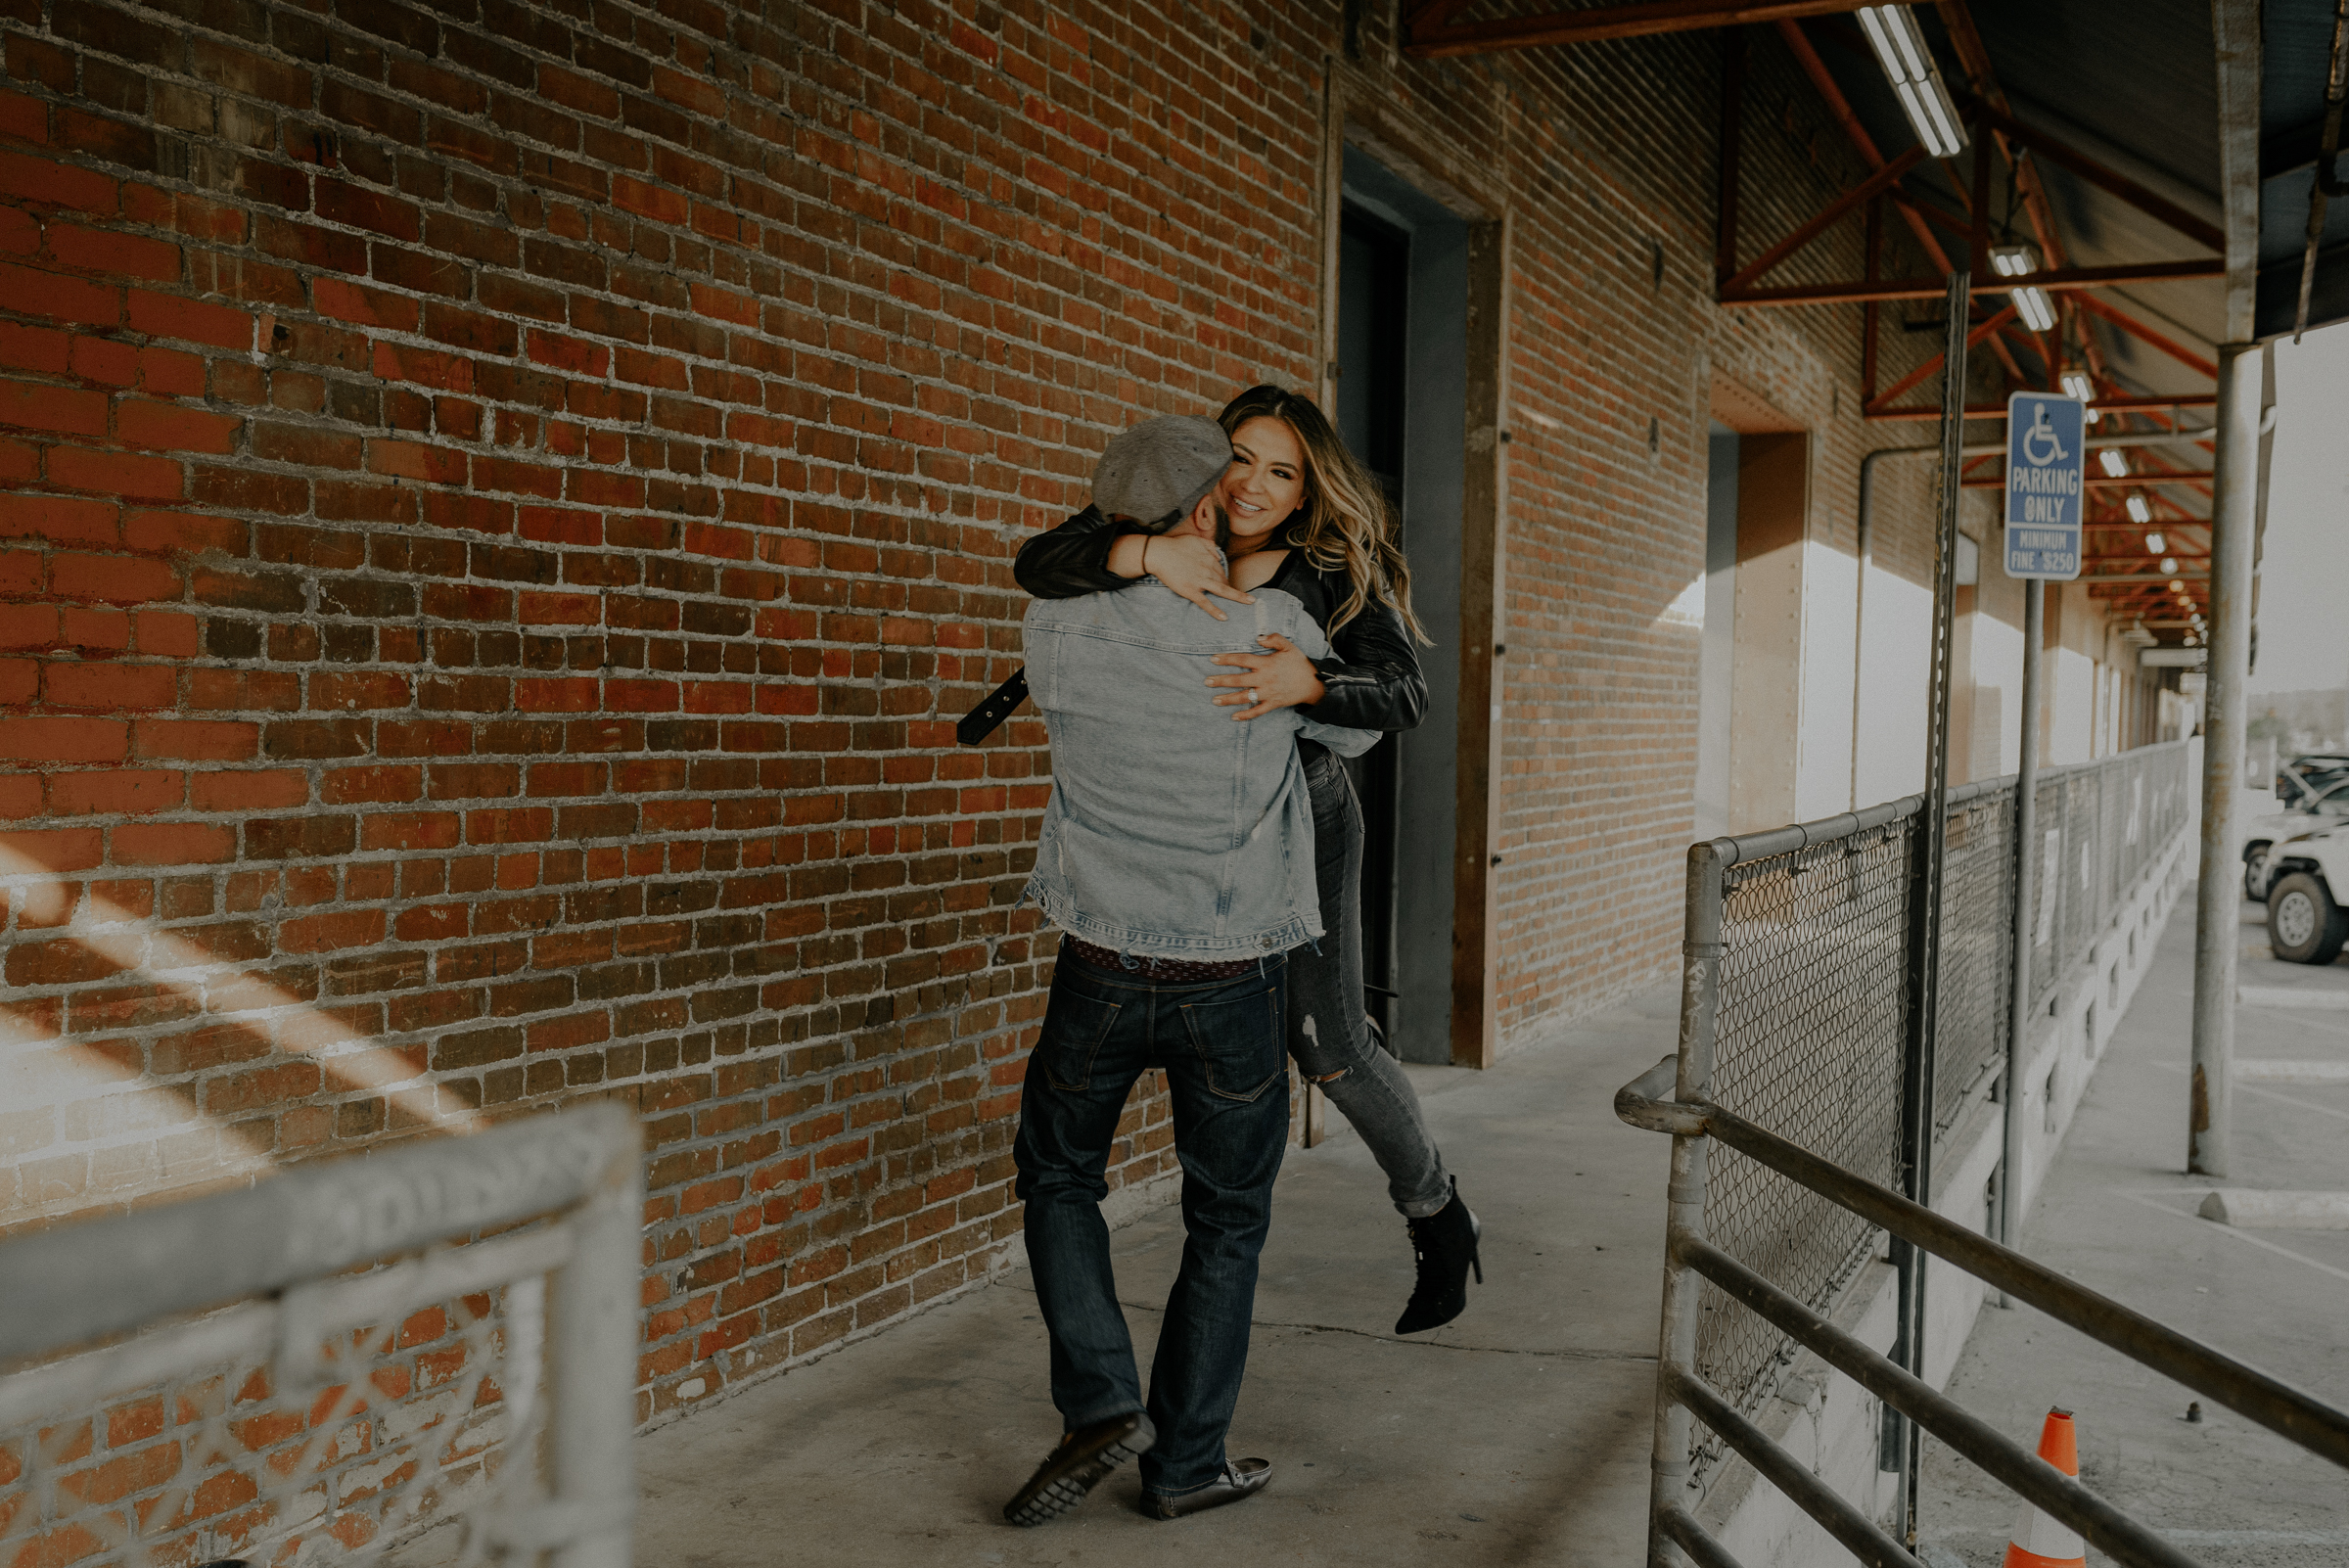 Isaiah + Taylor Photography - Los Angeles Wedding Photographer - DTLA Arts District  Engagement Session  014.jpg